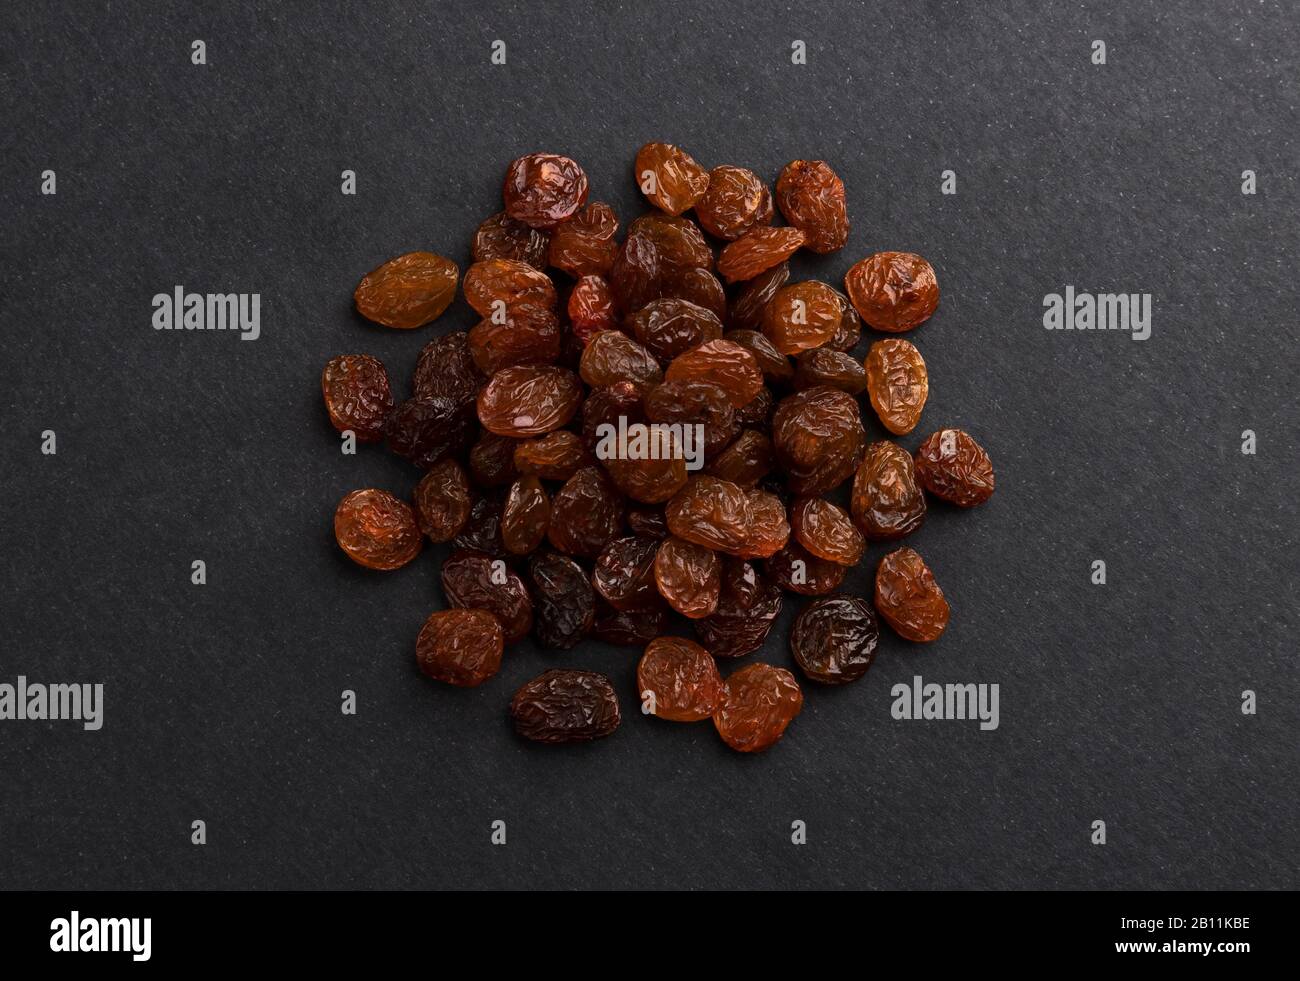 Pile of dried raisins on black background, top view Stock Photo